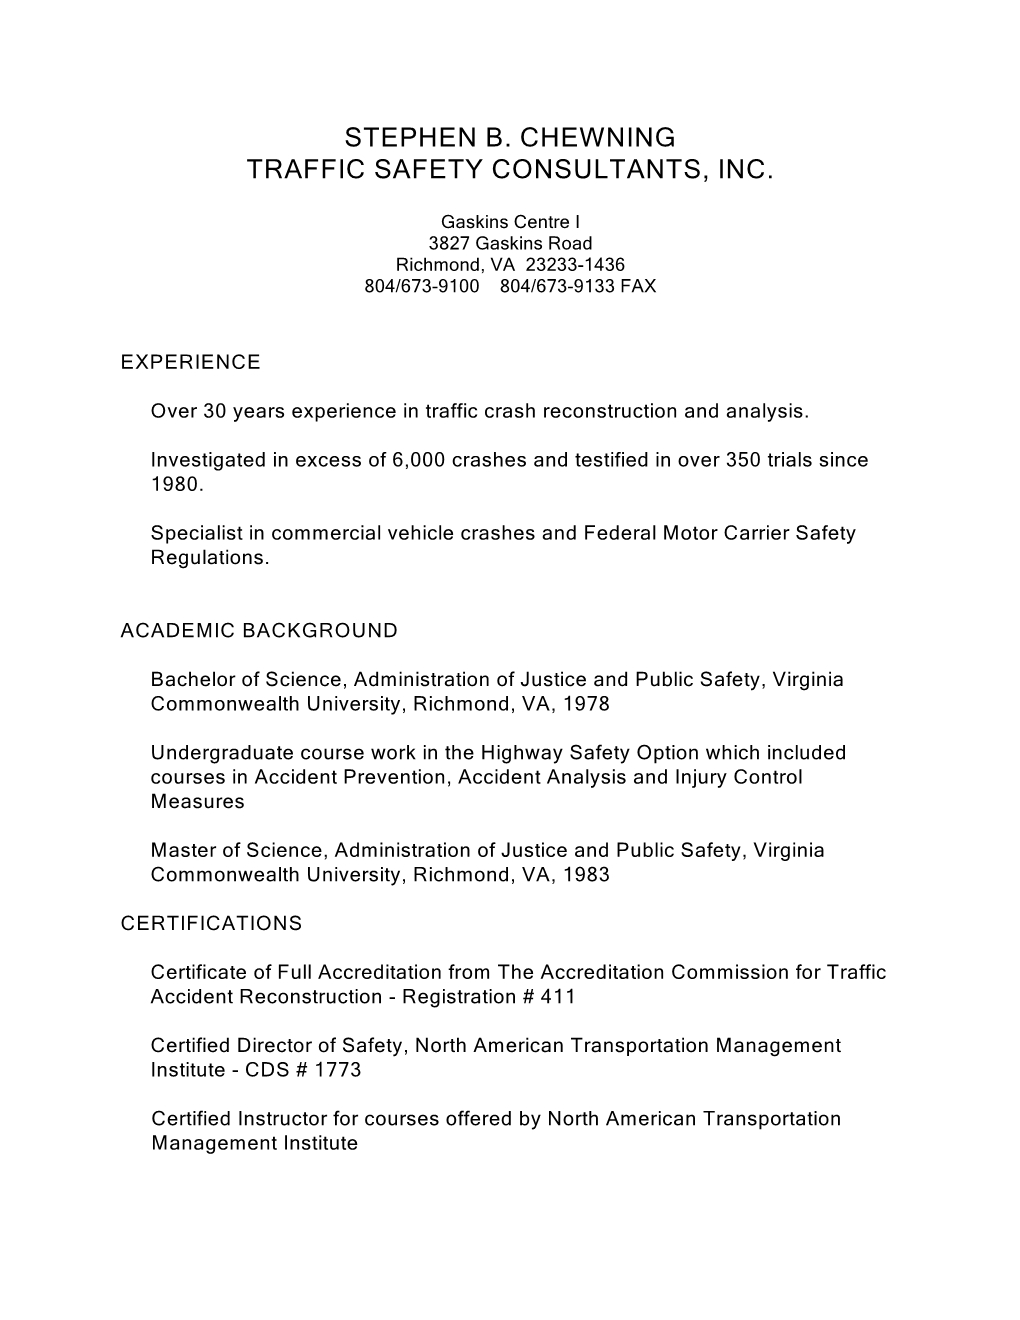 Stephen B. Chewning Traffic Safety Consultants, Inc